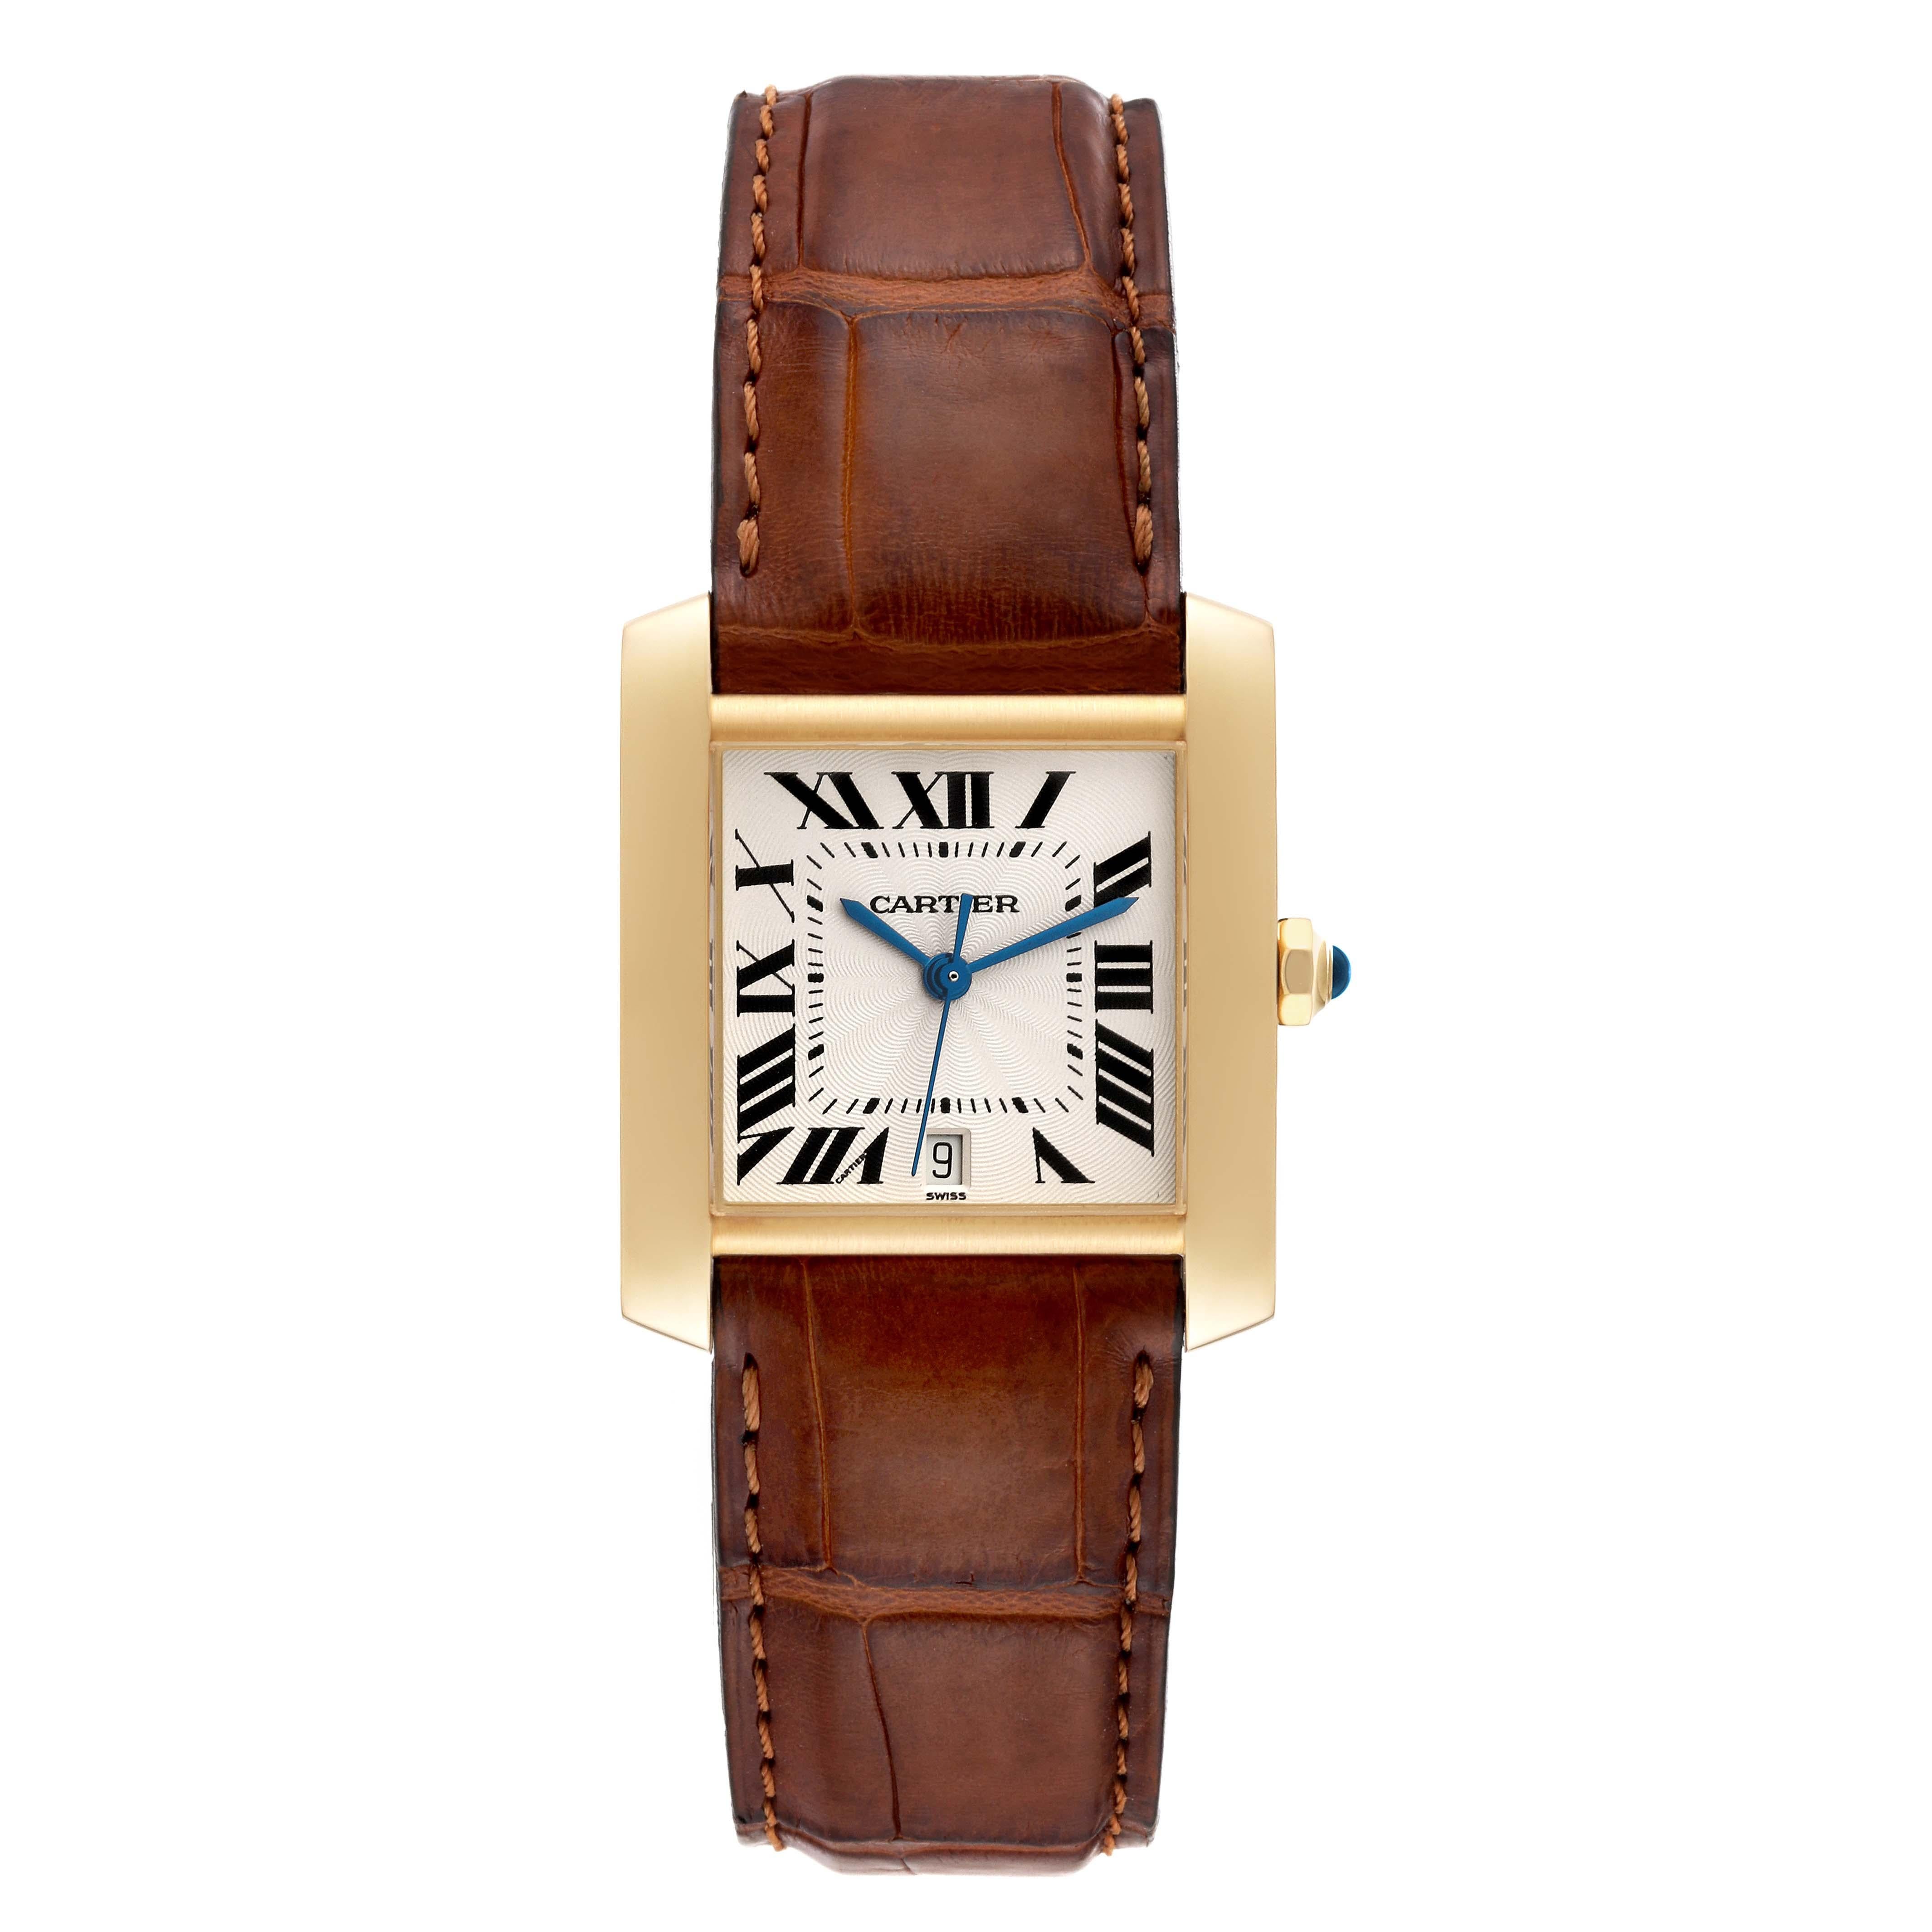 Cartier Tank Francaise Large Yellow Gold Automatic Mens Watch W5000156. Automatic self-winding movement. Rectangular 28.0 x 32.0 mm case. Octagonal 18K yellow gold crown set with a blue sapphire cabochon. . Scratch resistant sapphire crystal. Silver